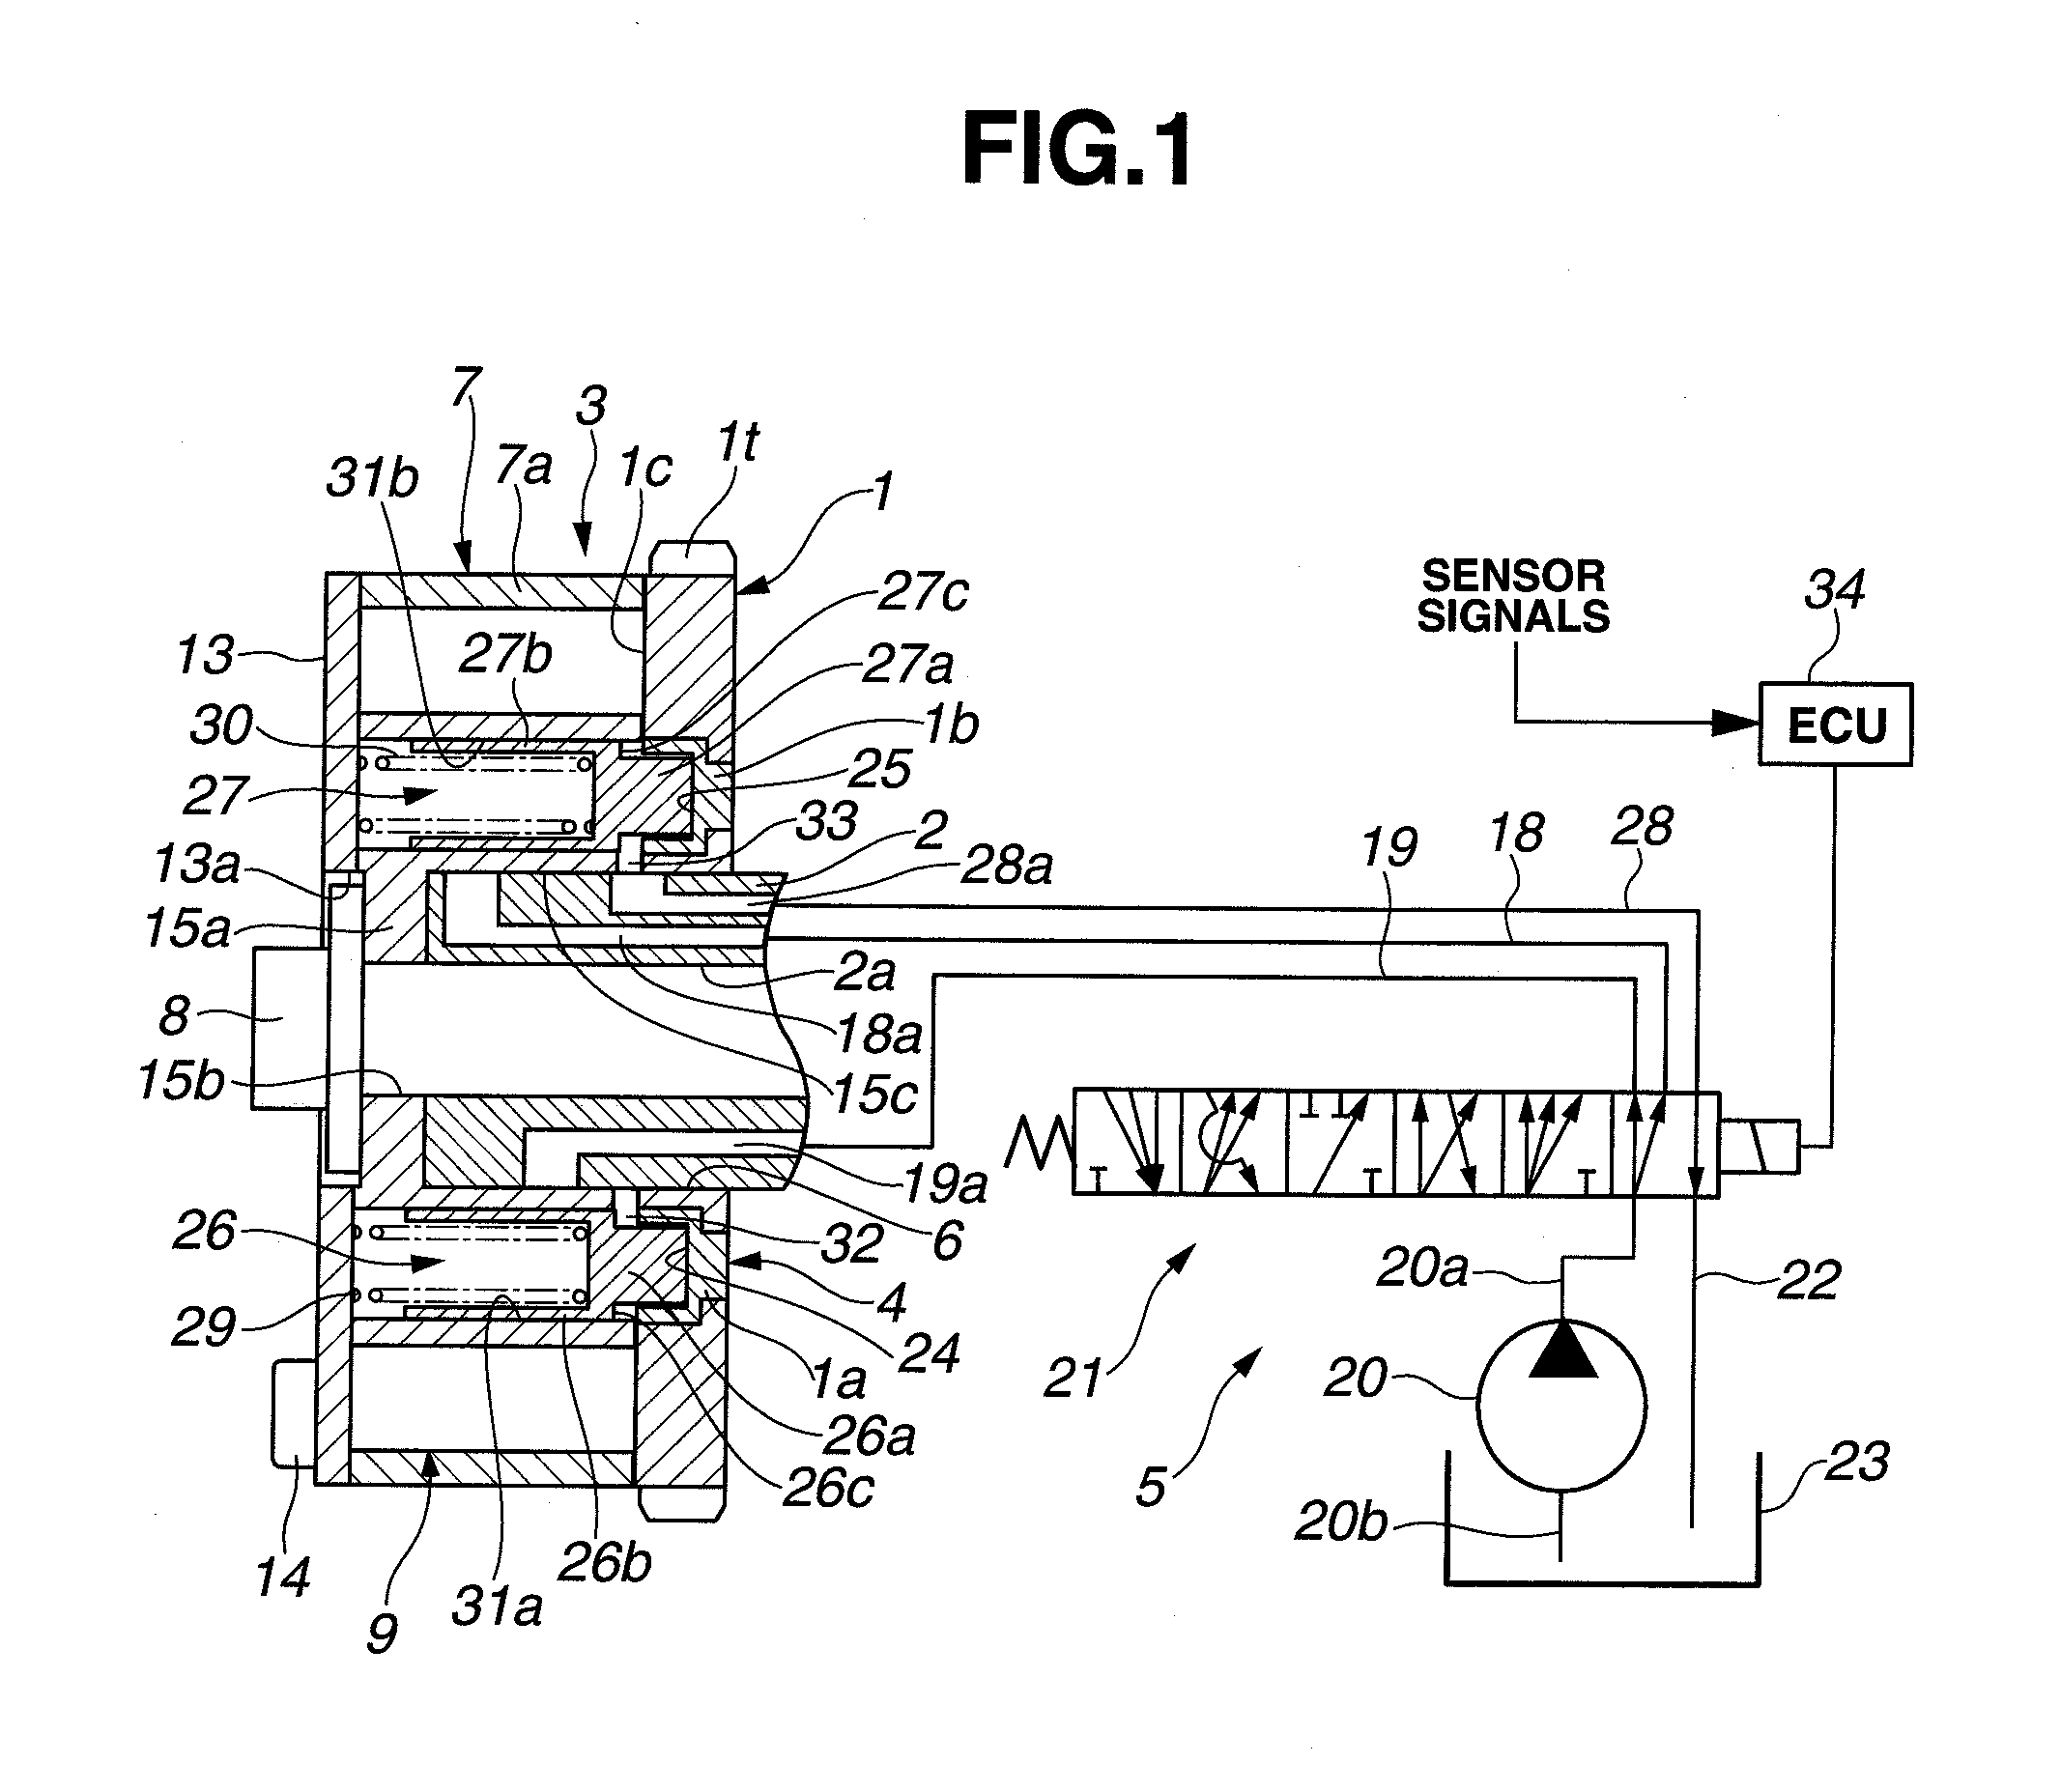 Hydraulic control unit for use in valve timing control apparatus and controller for hydraulic control unit